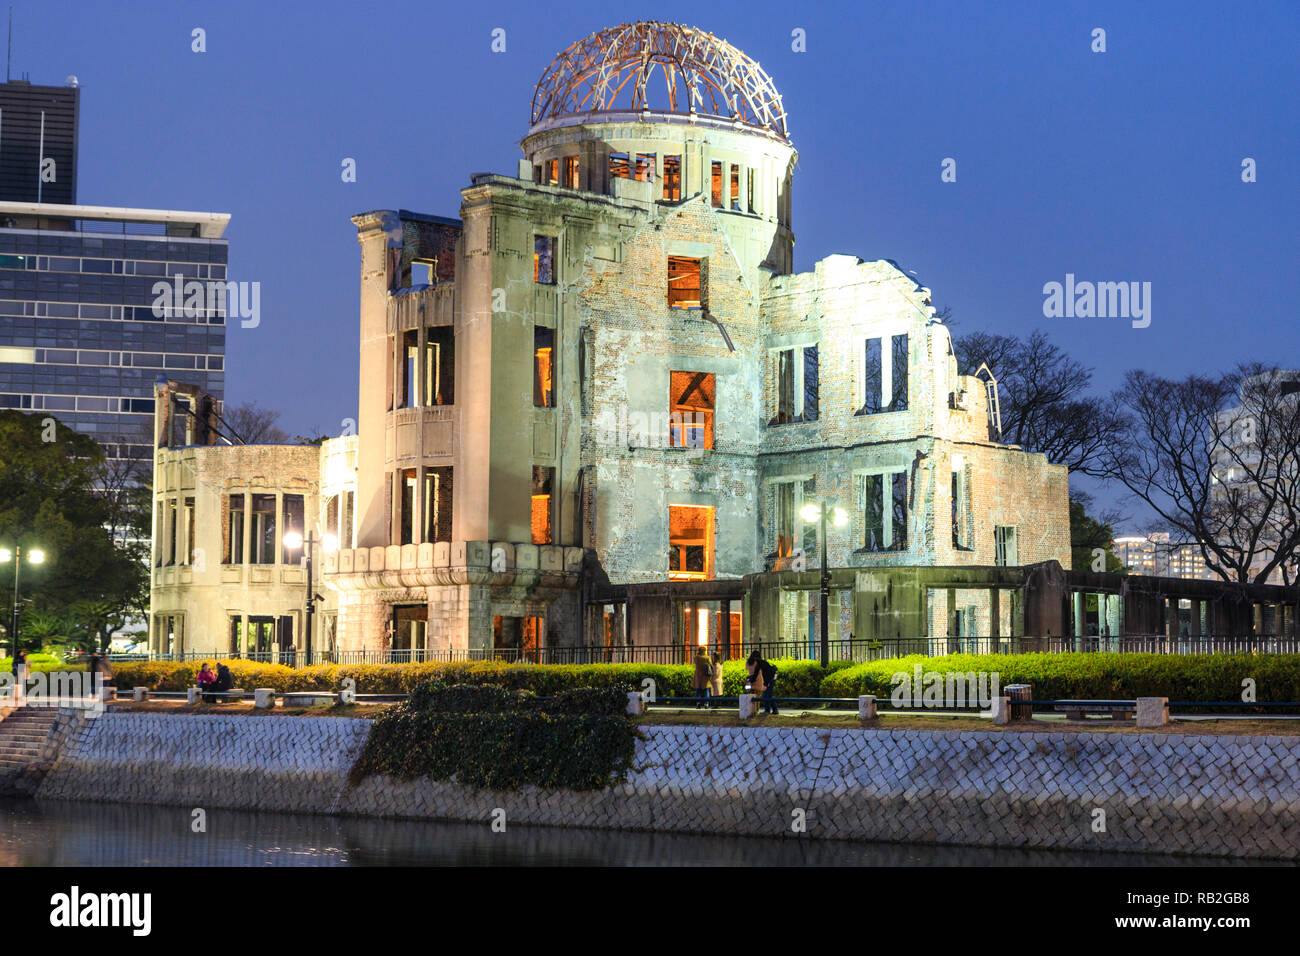 Hiroshima Peace Memorial, the Atomic Bomb Dome, A-Bomb Dome, Genbaku Dome, at night time with the river reflecting the building and lights. Stock Photo